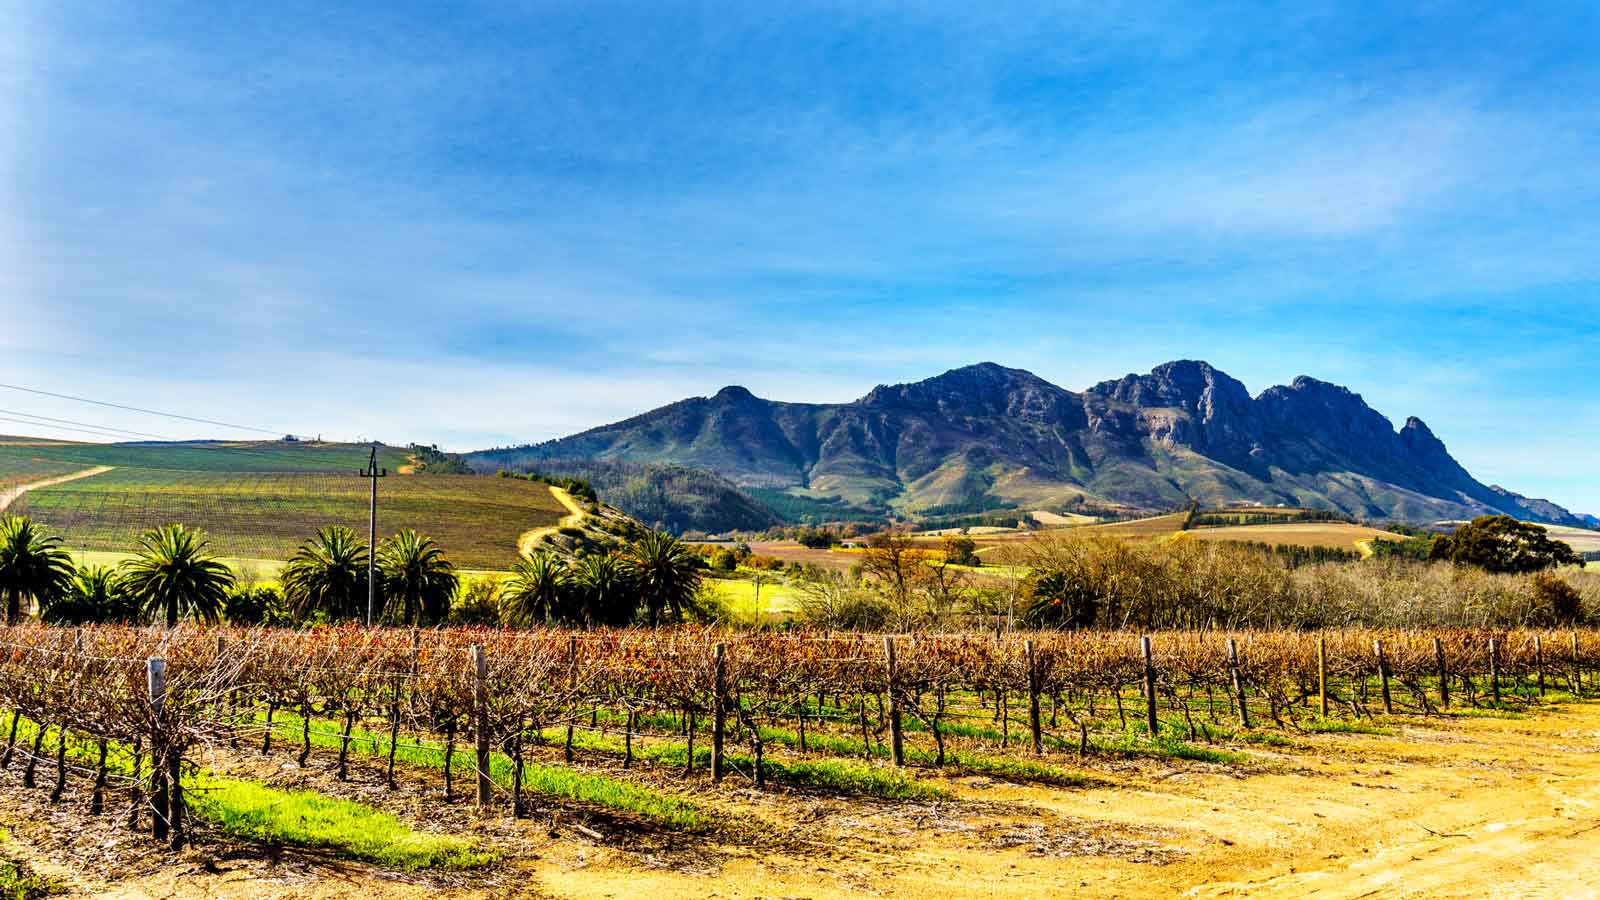 <p>Whether you’re a wine connoisseur or a traveler looking for a good time, a trip to the <a href="https://www.go2africa.com/destinations/cape-winelands/where-to-go" rel="nofollow noopener">Cape Winelands</a> is well worth your time. There are wine trams that take you to the vineyards, and the mountainous terrain you drive through is a bonus.</p>